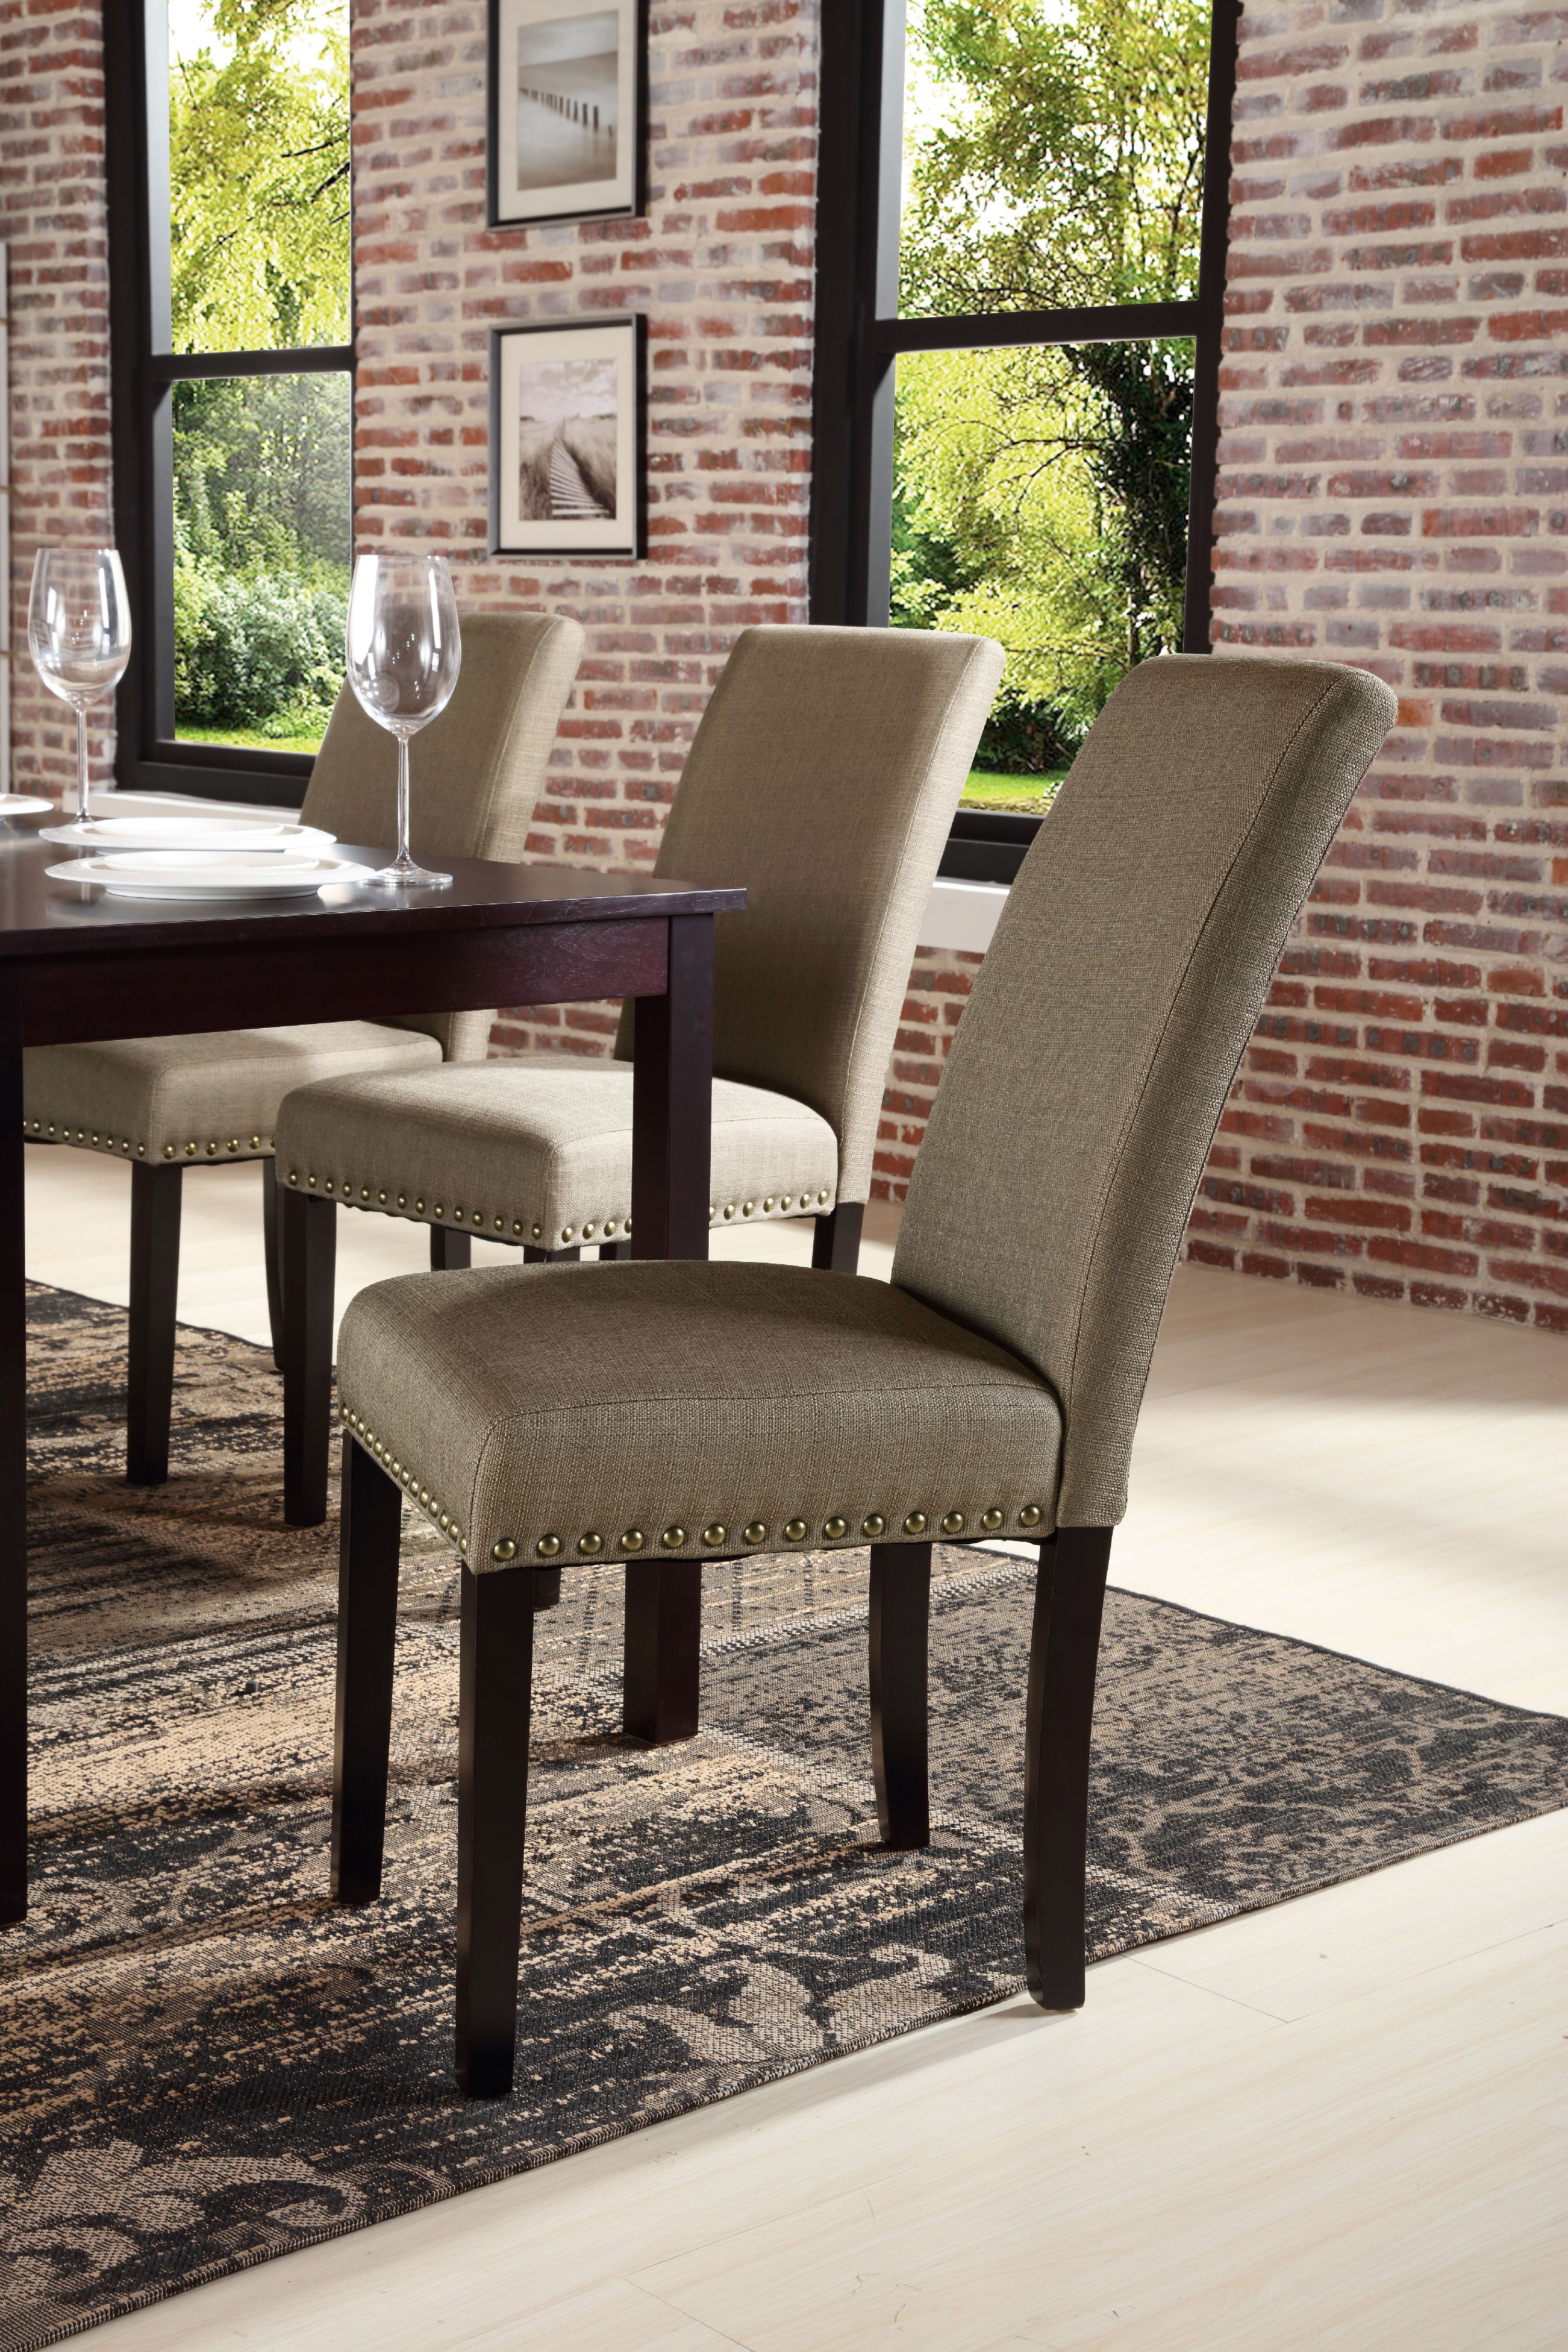 DHI Nice Nail Head Upholstered Dining Chair, 2 Pack, Multiple Colors - image 4 of 7